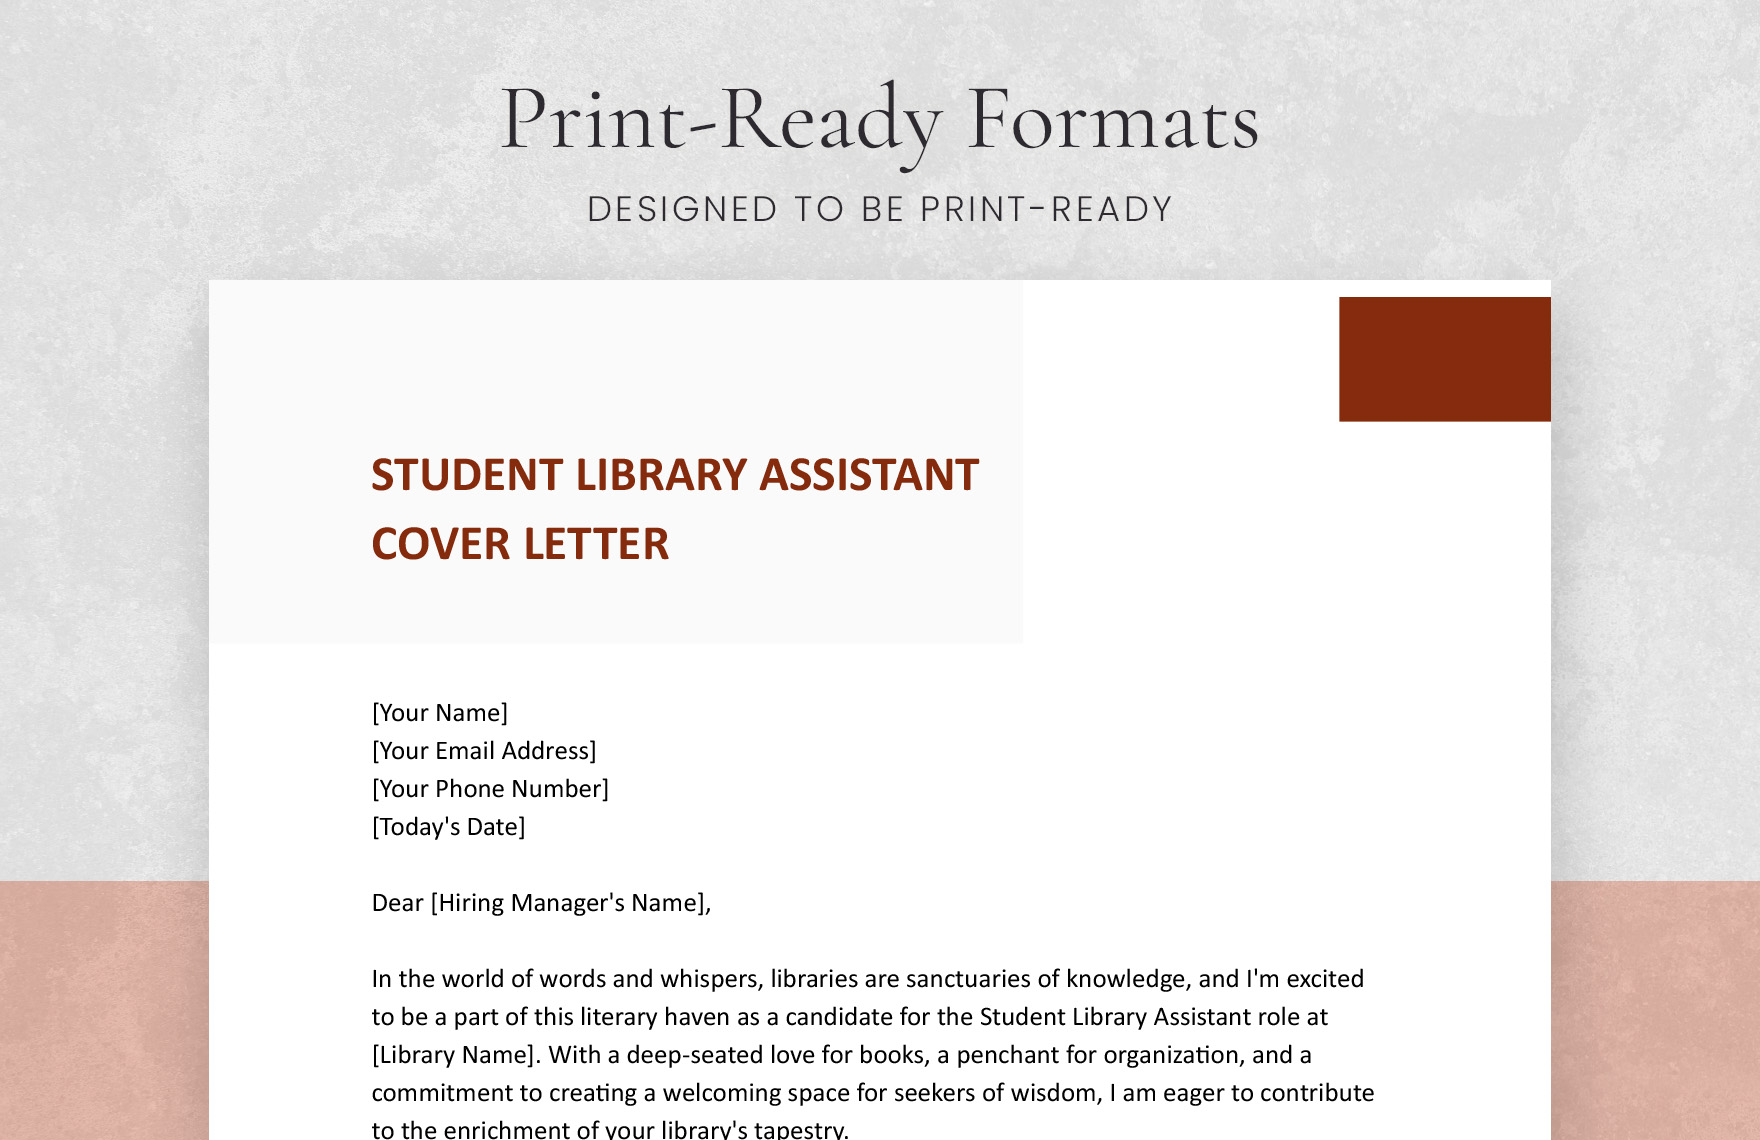 Student Library Assistant Cover Letter